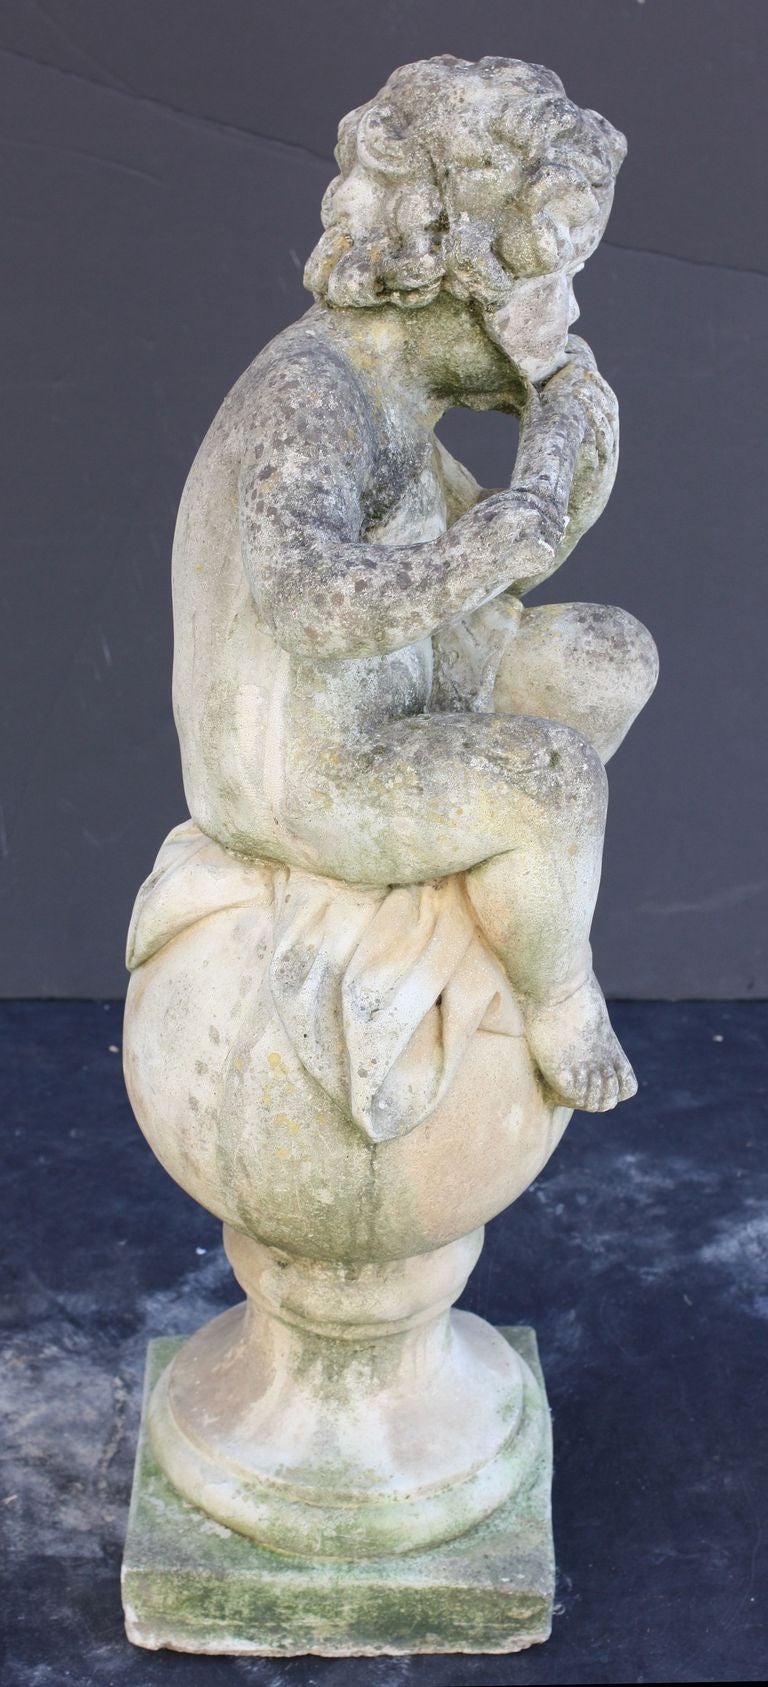 An English garden statue or ornamental figure of composition stone,   featuring a cherub or child putti in the Classical style, posed in a sitting position, playing a flute, on a ball and plinth base.
Great detail in the round.

Perfect for a